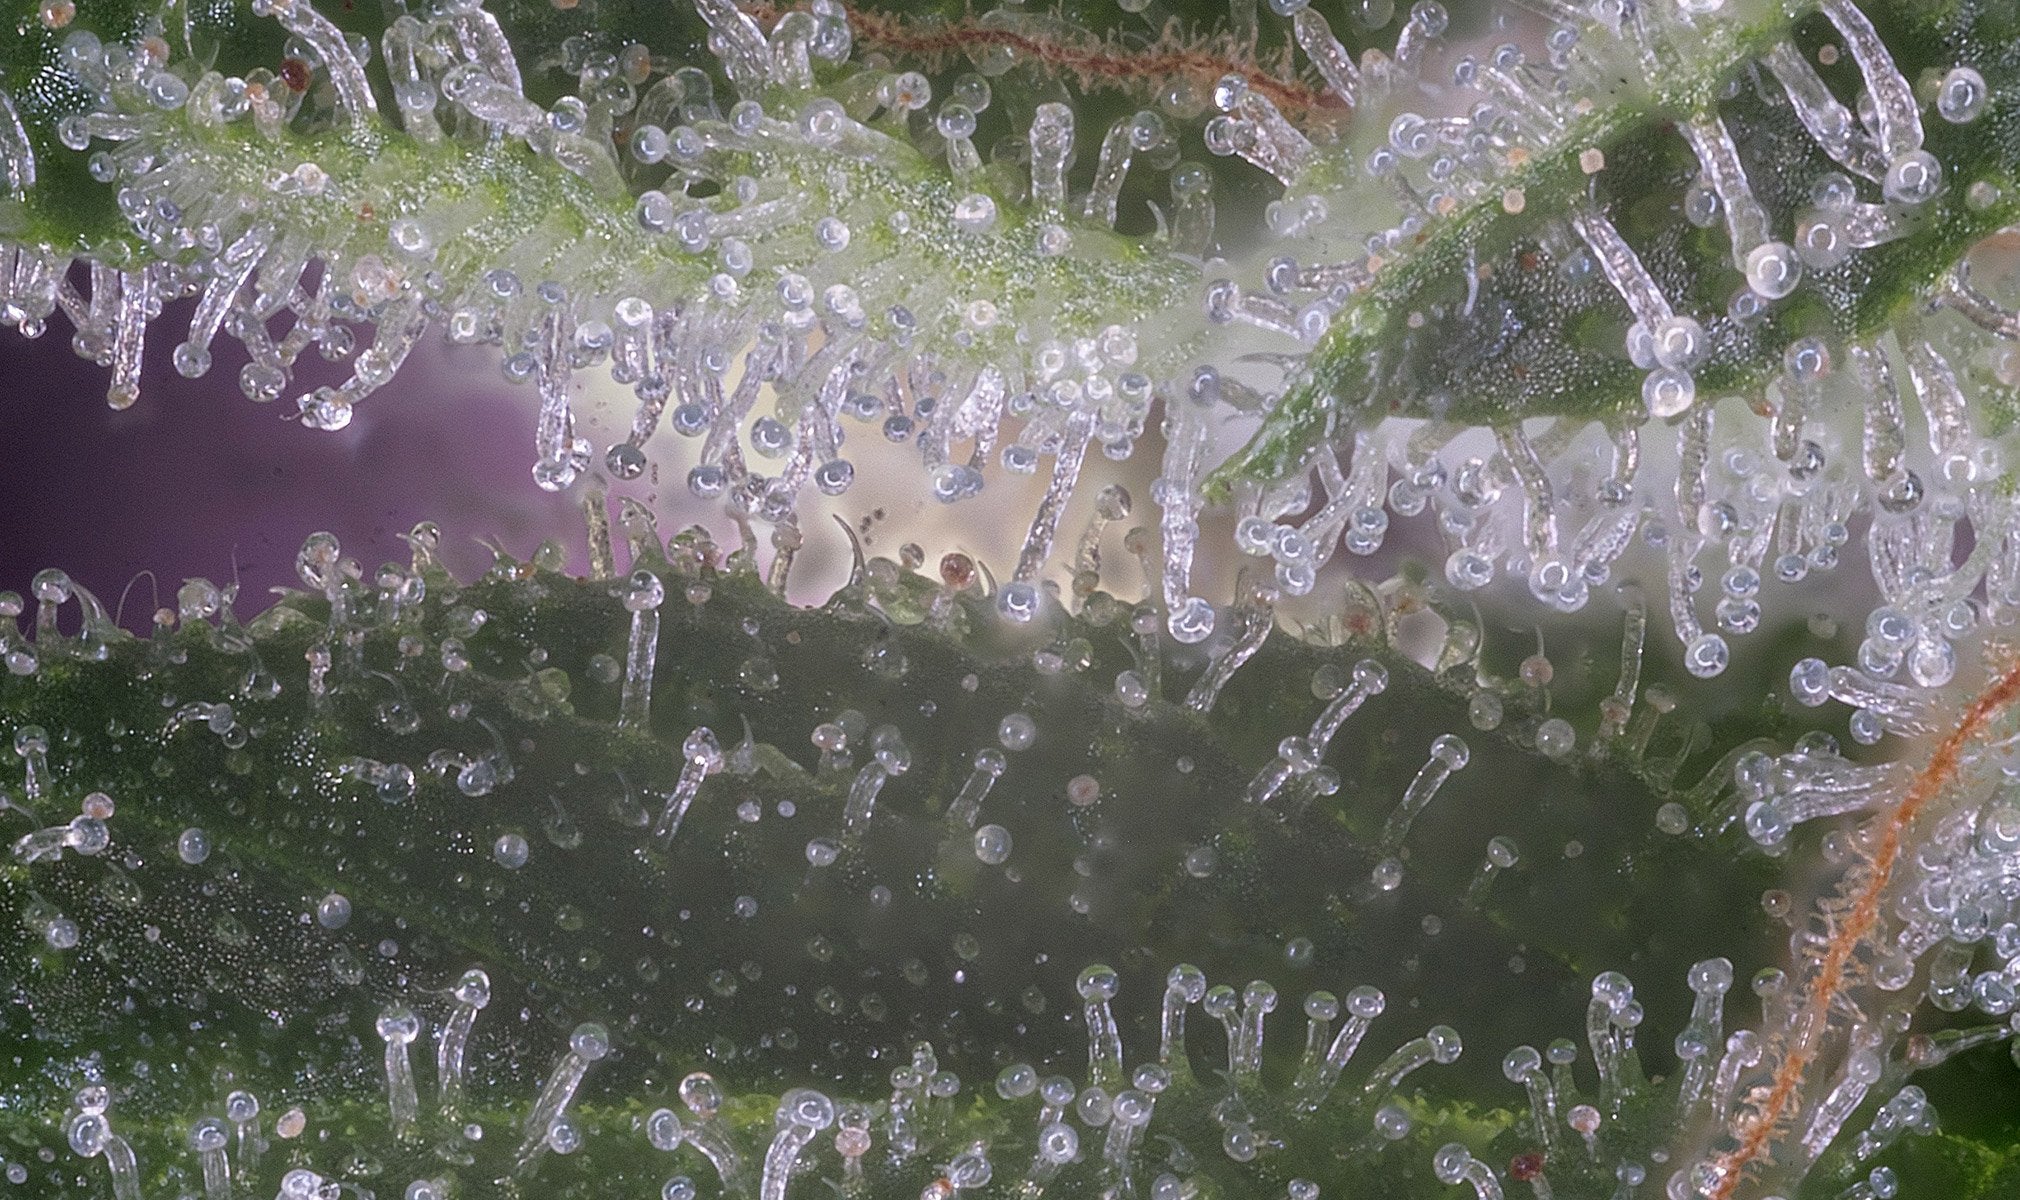 Trichomes: Why Does Cannabis Produce Cannabinoids?